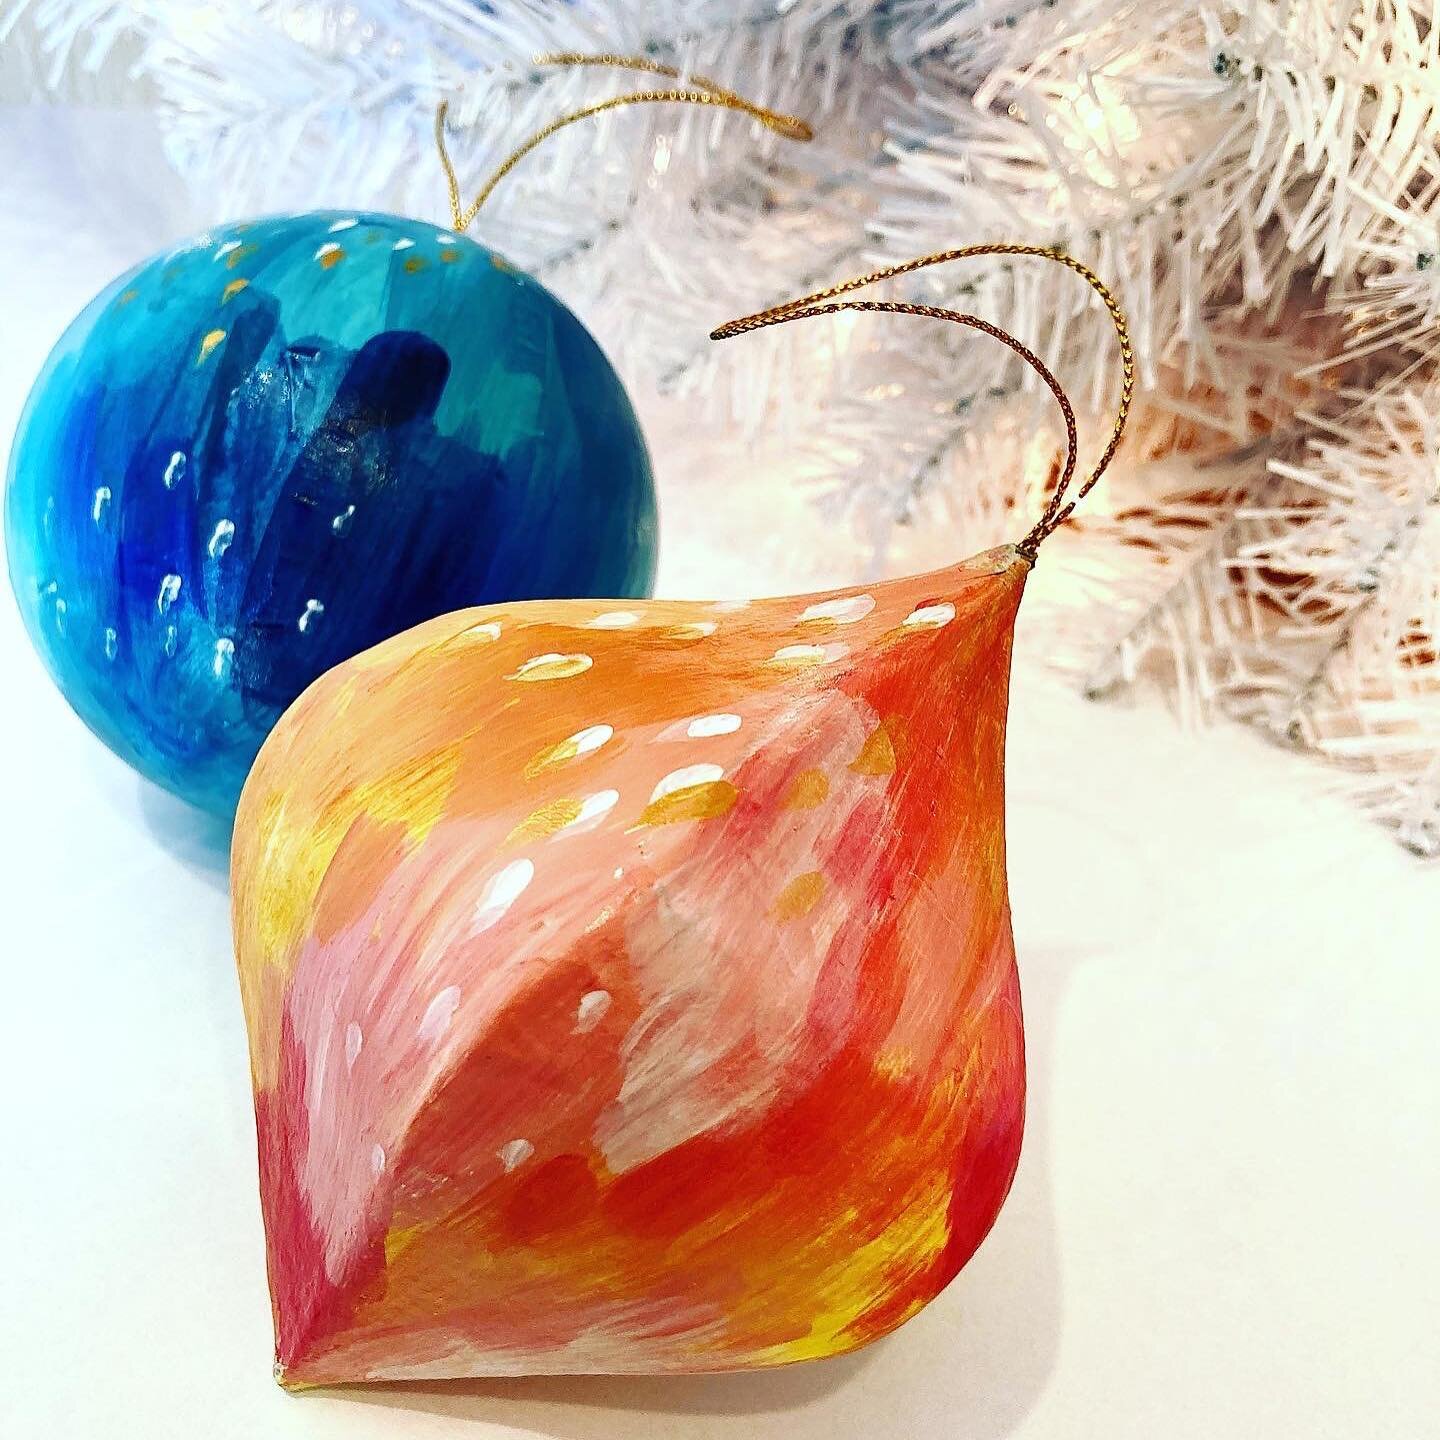 Would there be any interest in these hand painted ornaments? They are paper mache (which is nice because they won&rsquo;t shatter). I hand painted with acrylic and finished with a varnish. 

If interested, what color schemes would you like to see? I 